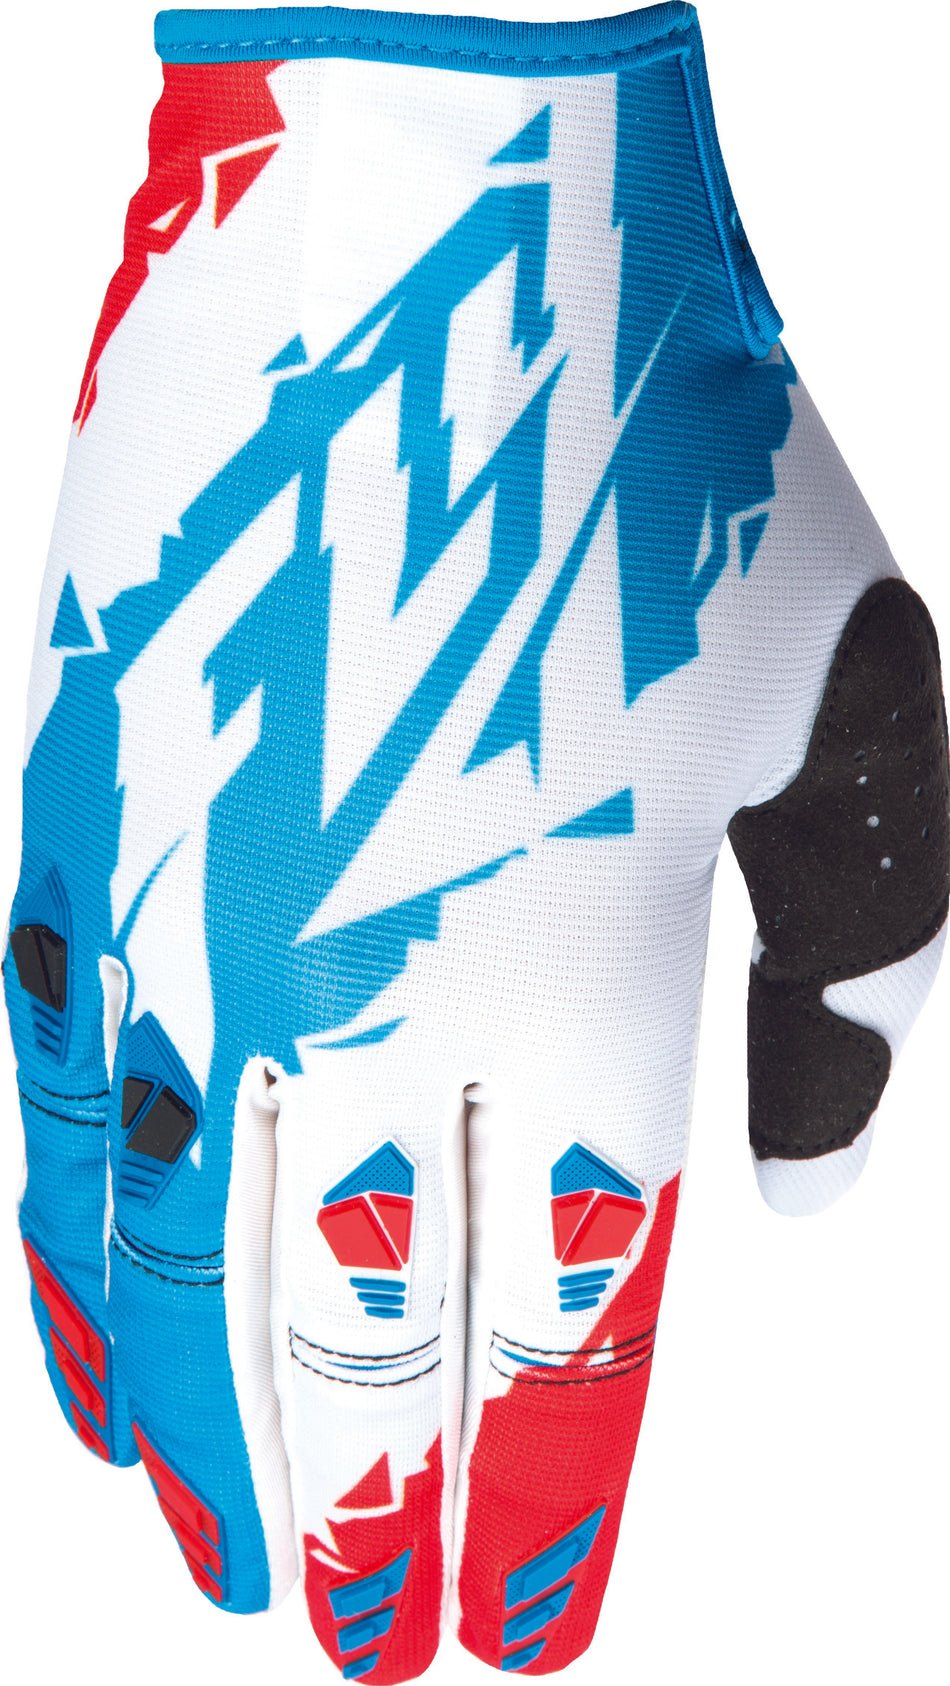 FLY RACING Kinetic Glove Red/White/Blue Sz 4 Ys 370-41104